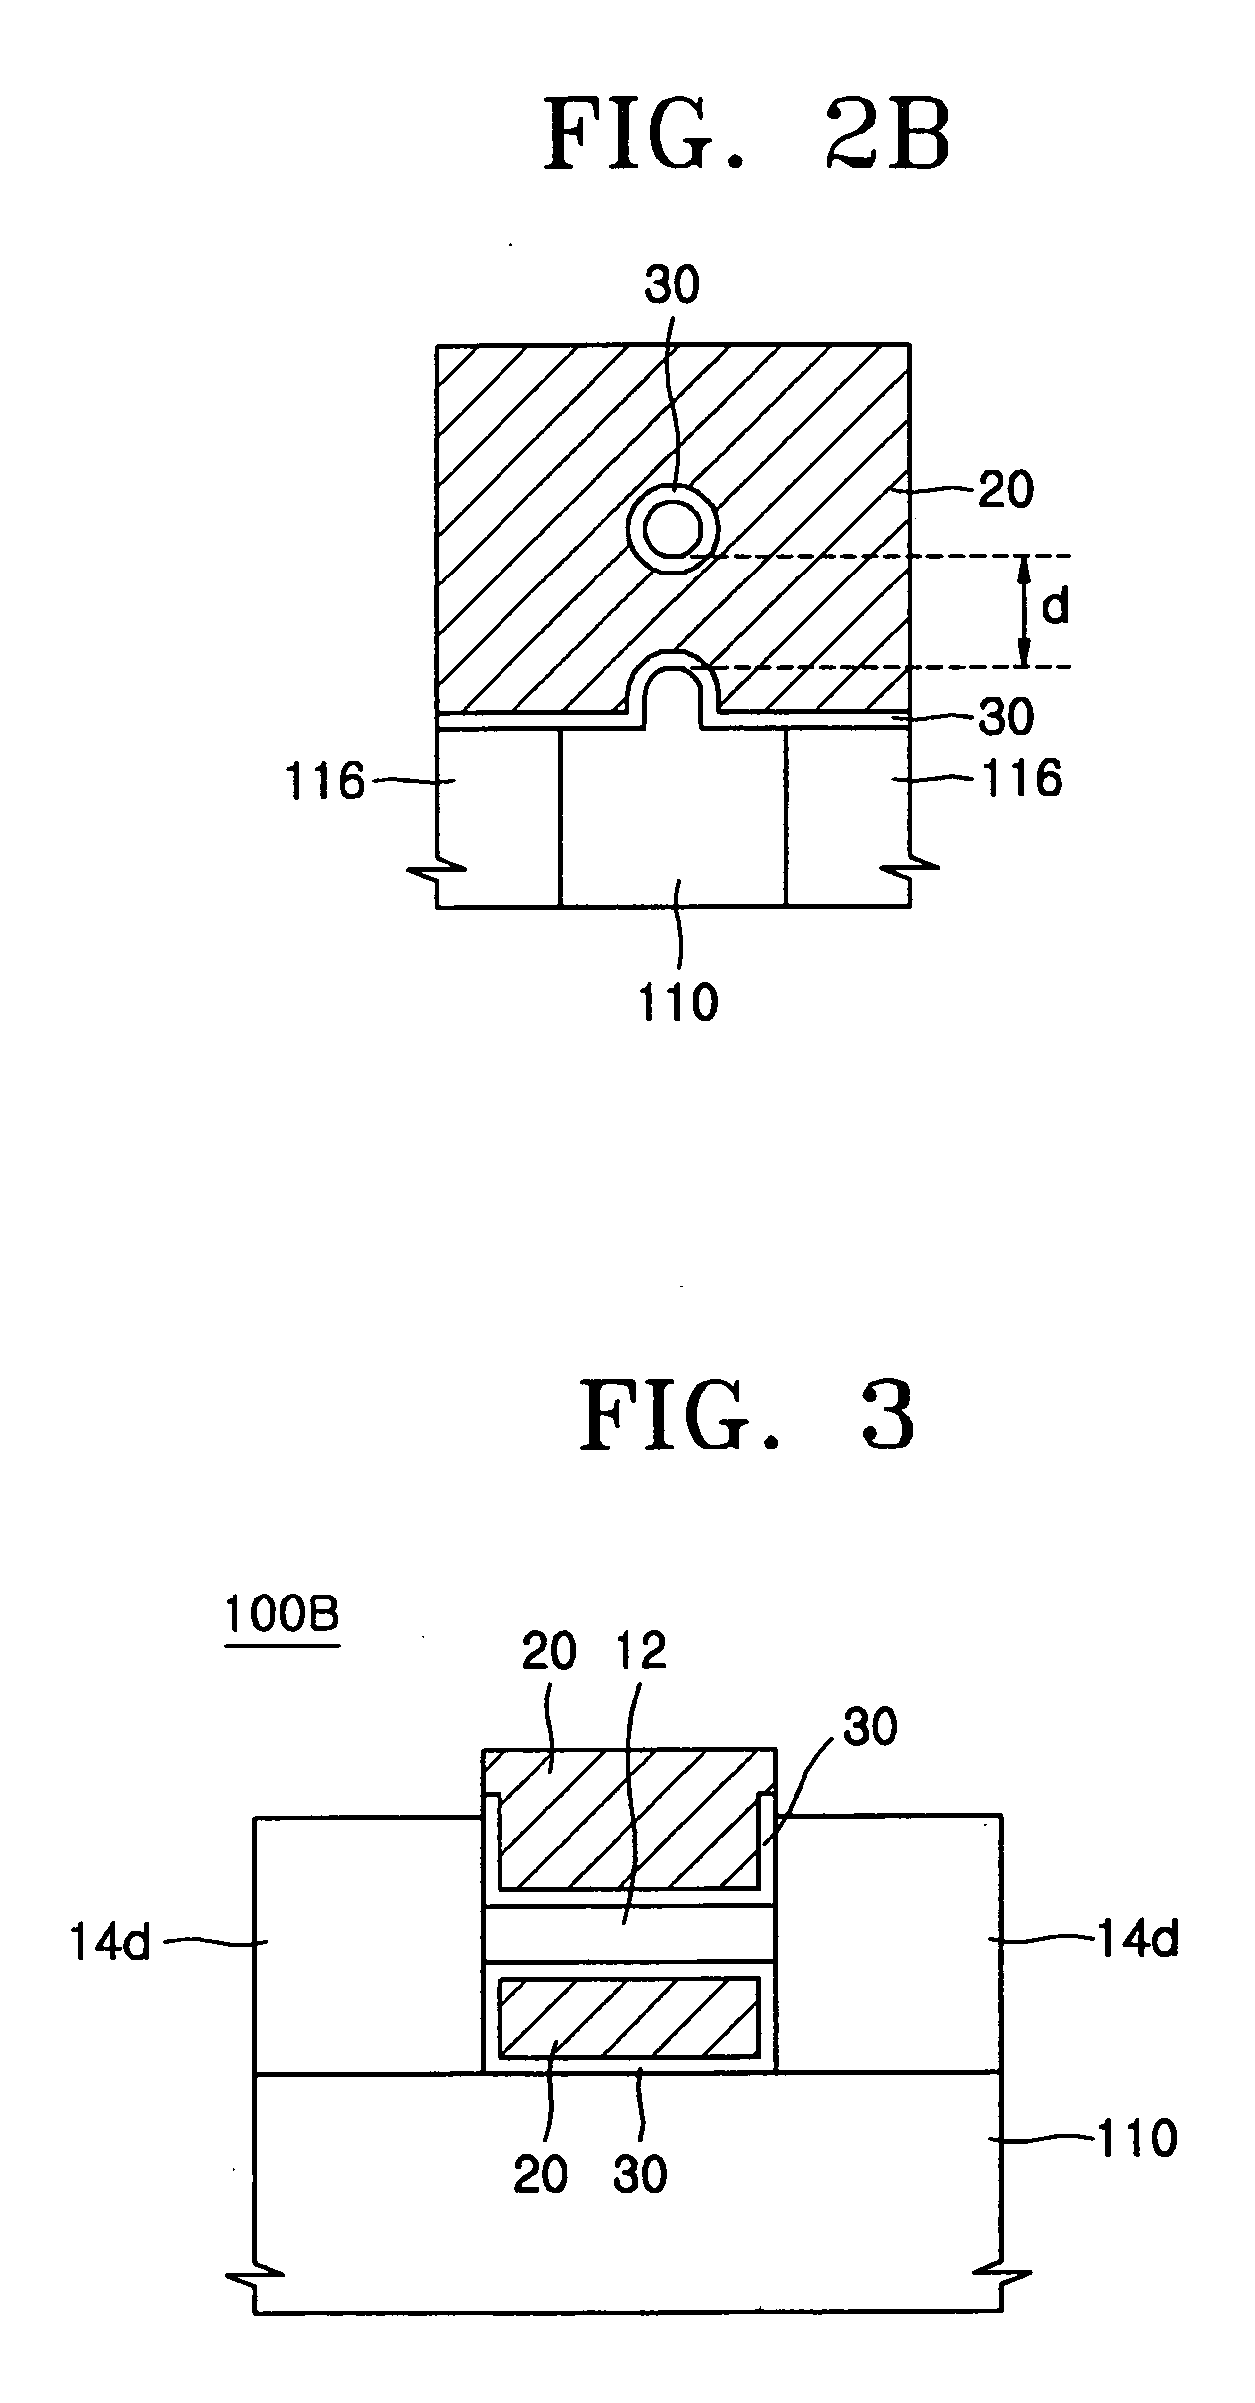 Semiconductor device having a round-shaped nano-wire transistor channel and method of manufacturing same